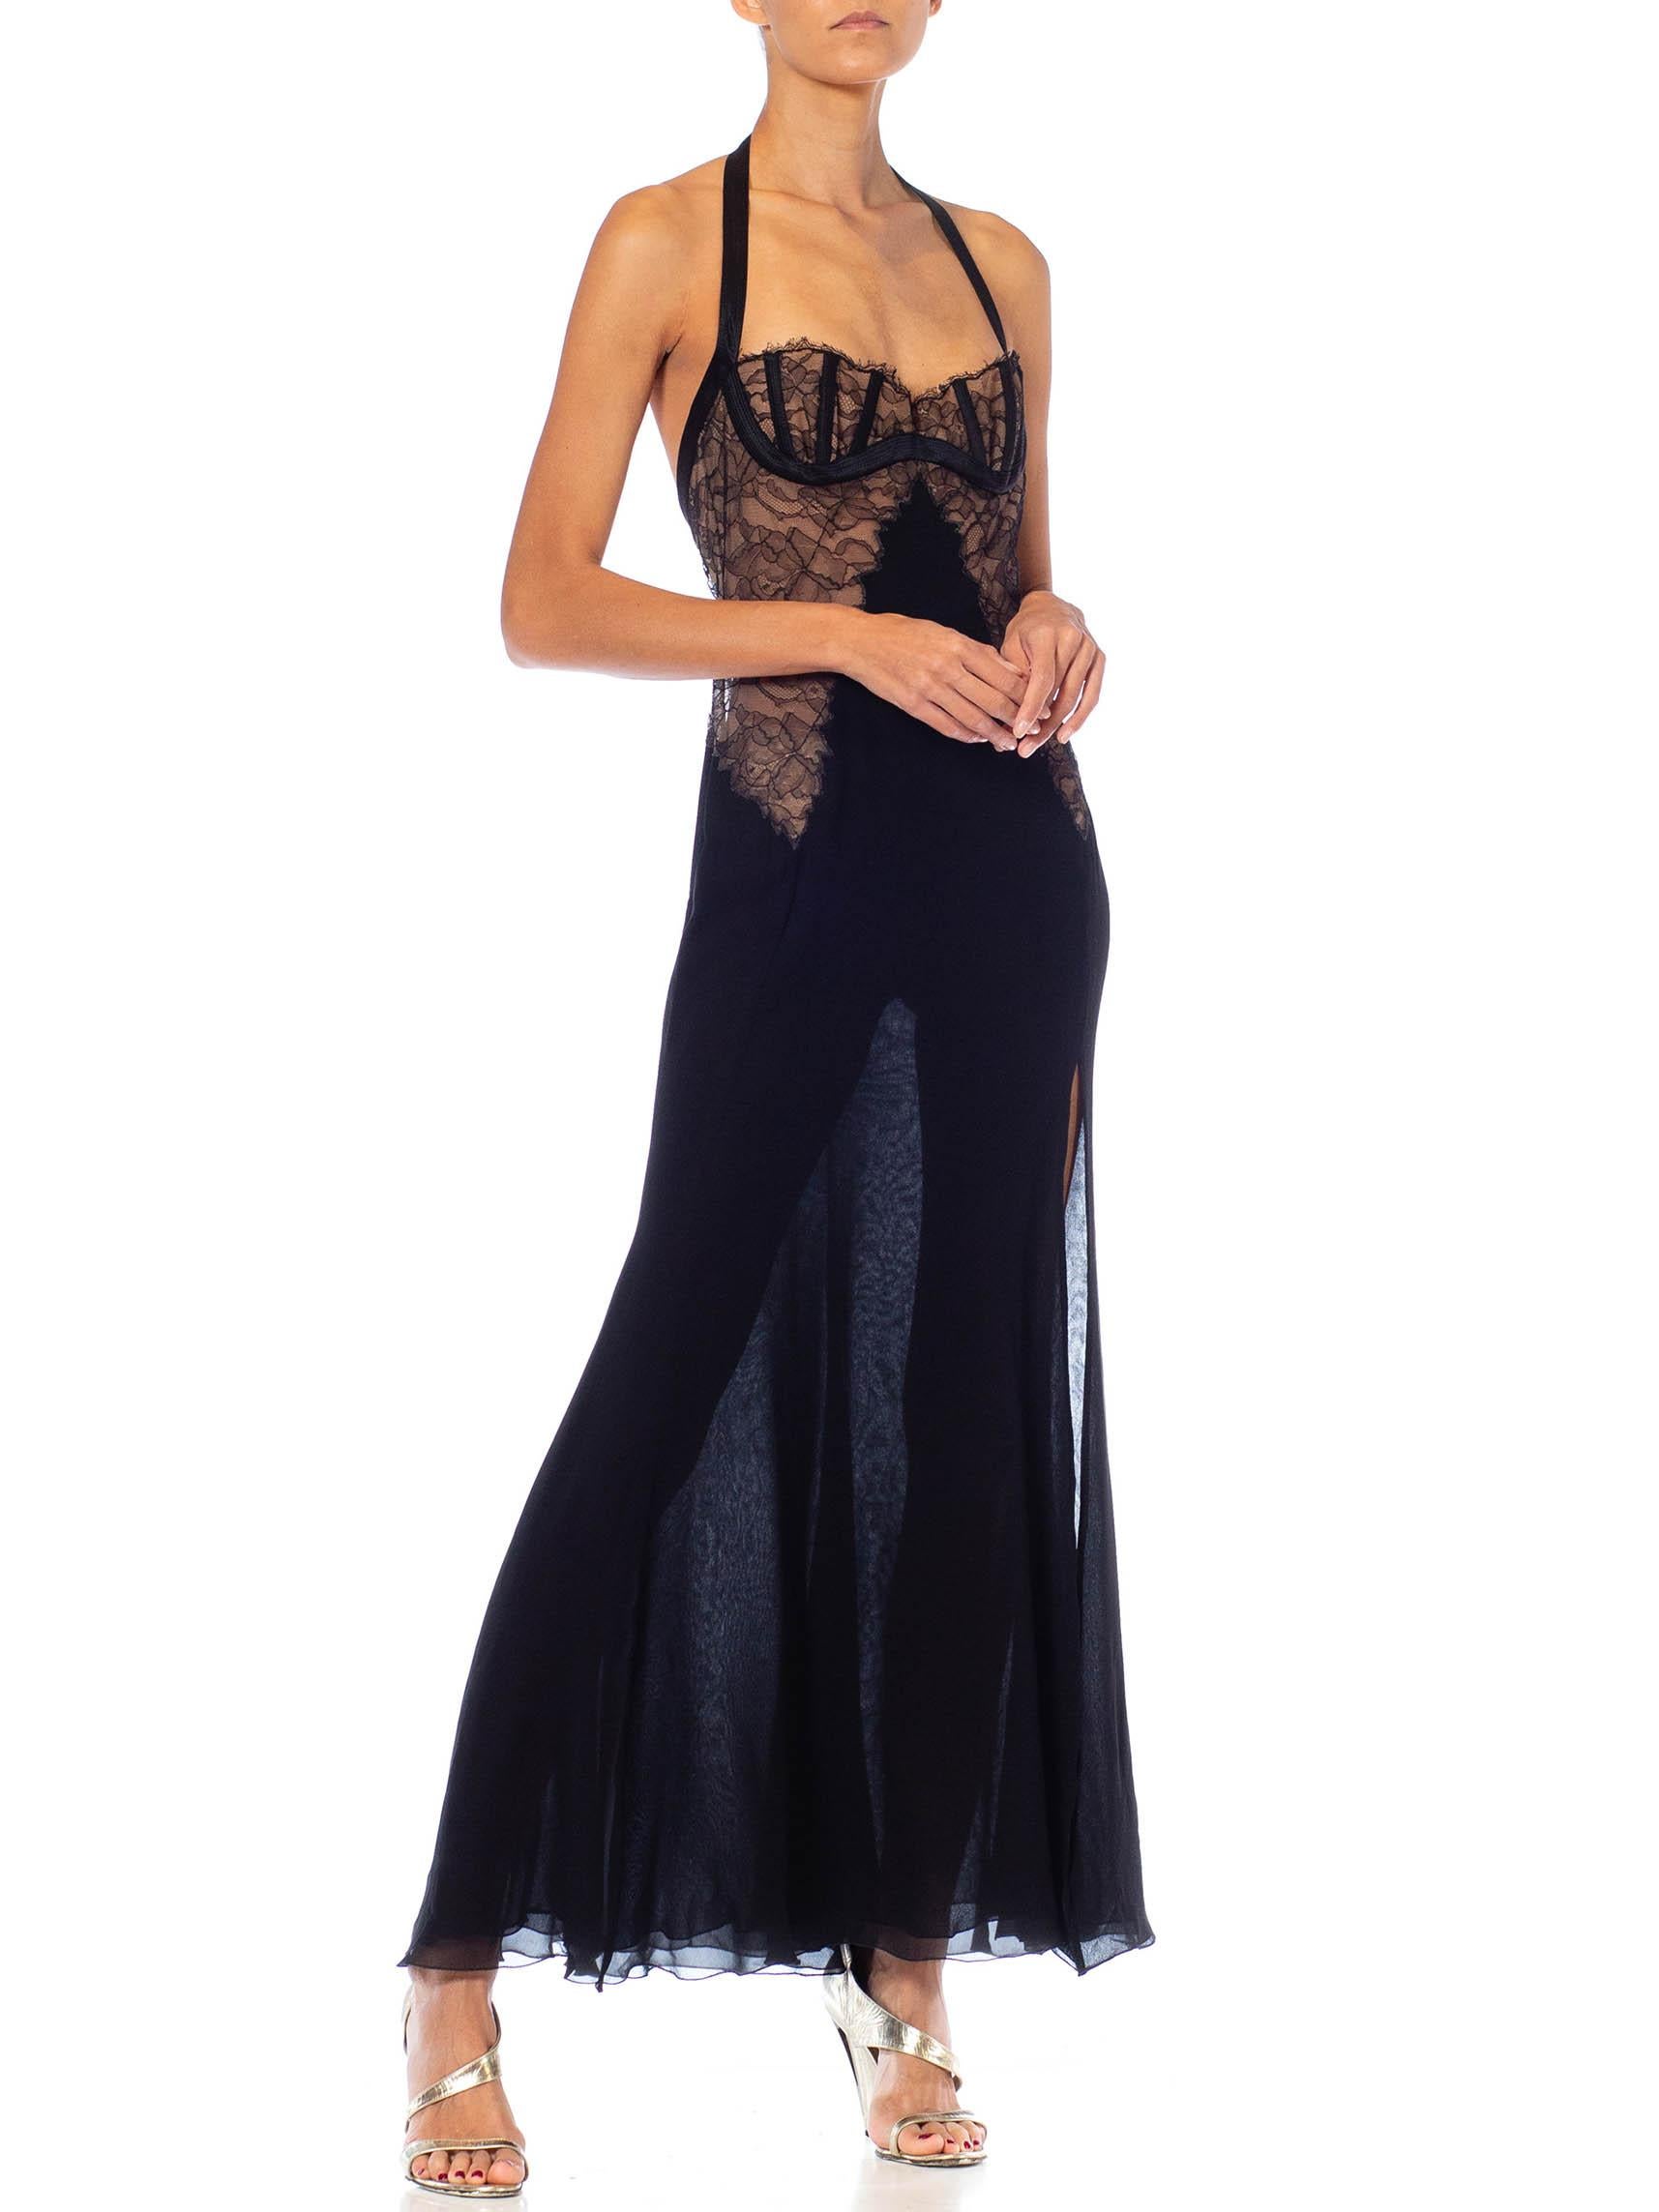 1990S Gianni Versace Black Silk Chiffon & Lace Lingerie Gown With High Slit 4